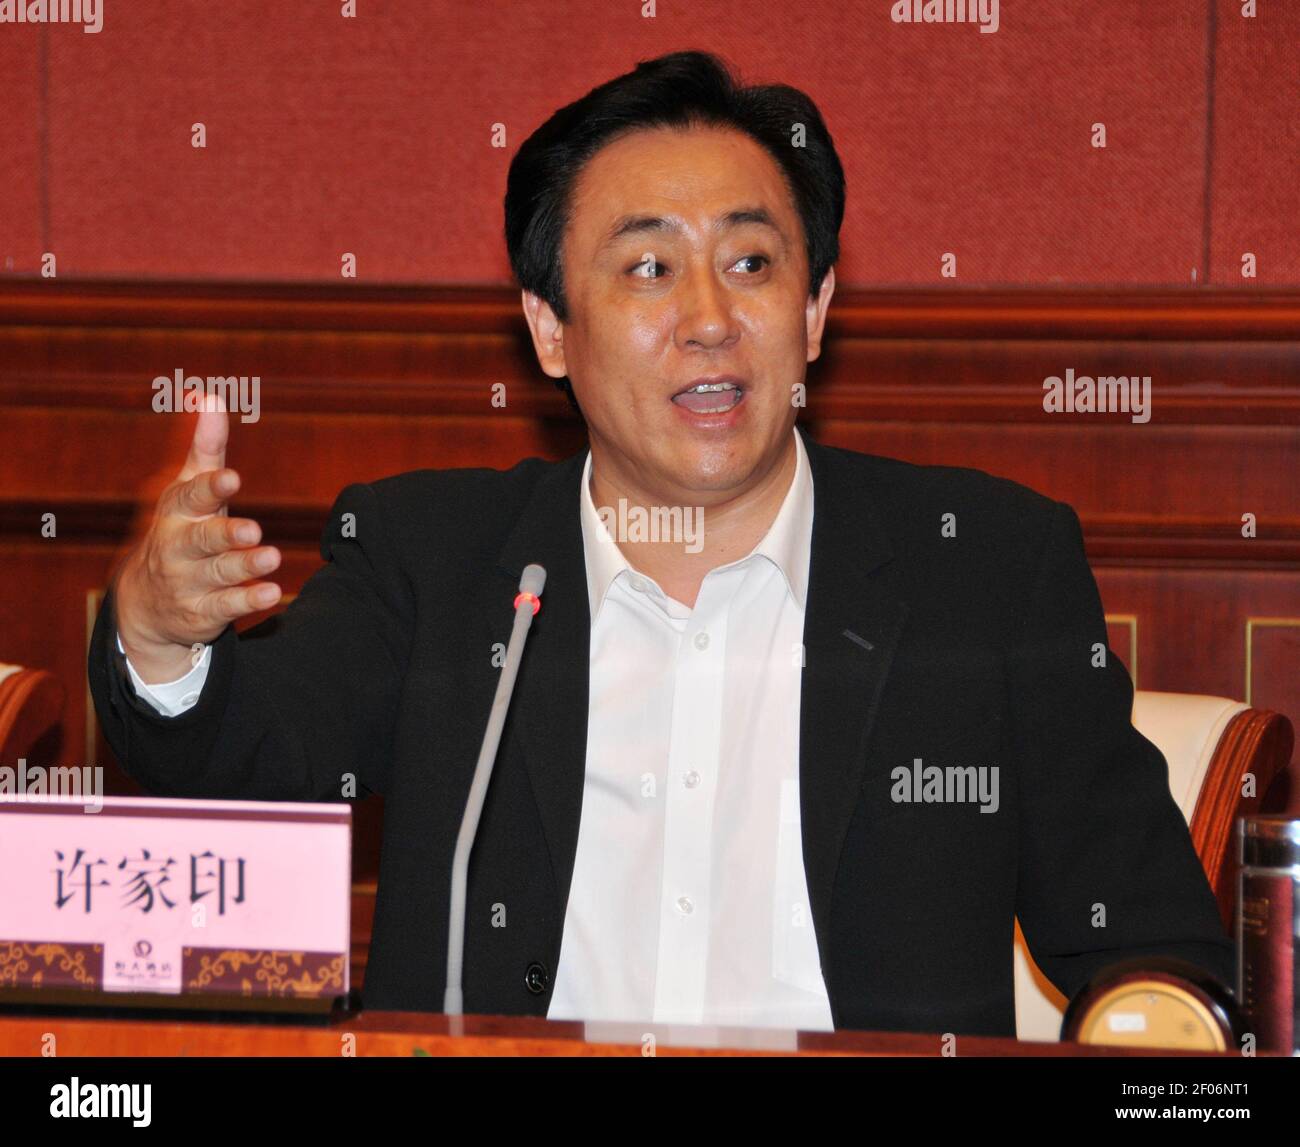 --FILE--Xu Jiayin (Hui Ka Yan), Chairman of Evergrande Group, delivers a speech at a conference of Henan Chamber of Commerce, Guangdong Province in Guangzhou city, south China's Guangdong province, 17 September 2011. Xu Jiayin (Hui Ka Yan), Chairman of Evergrande Group, ranks the third among the richest Chinese in 2019 according to Forbes. Stock Photo